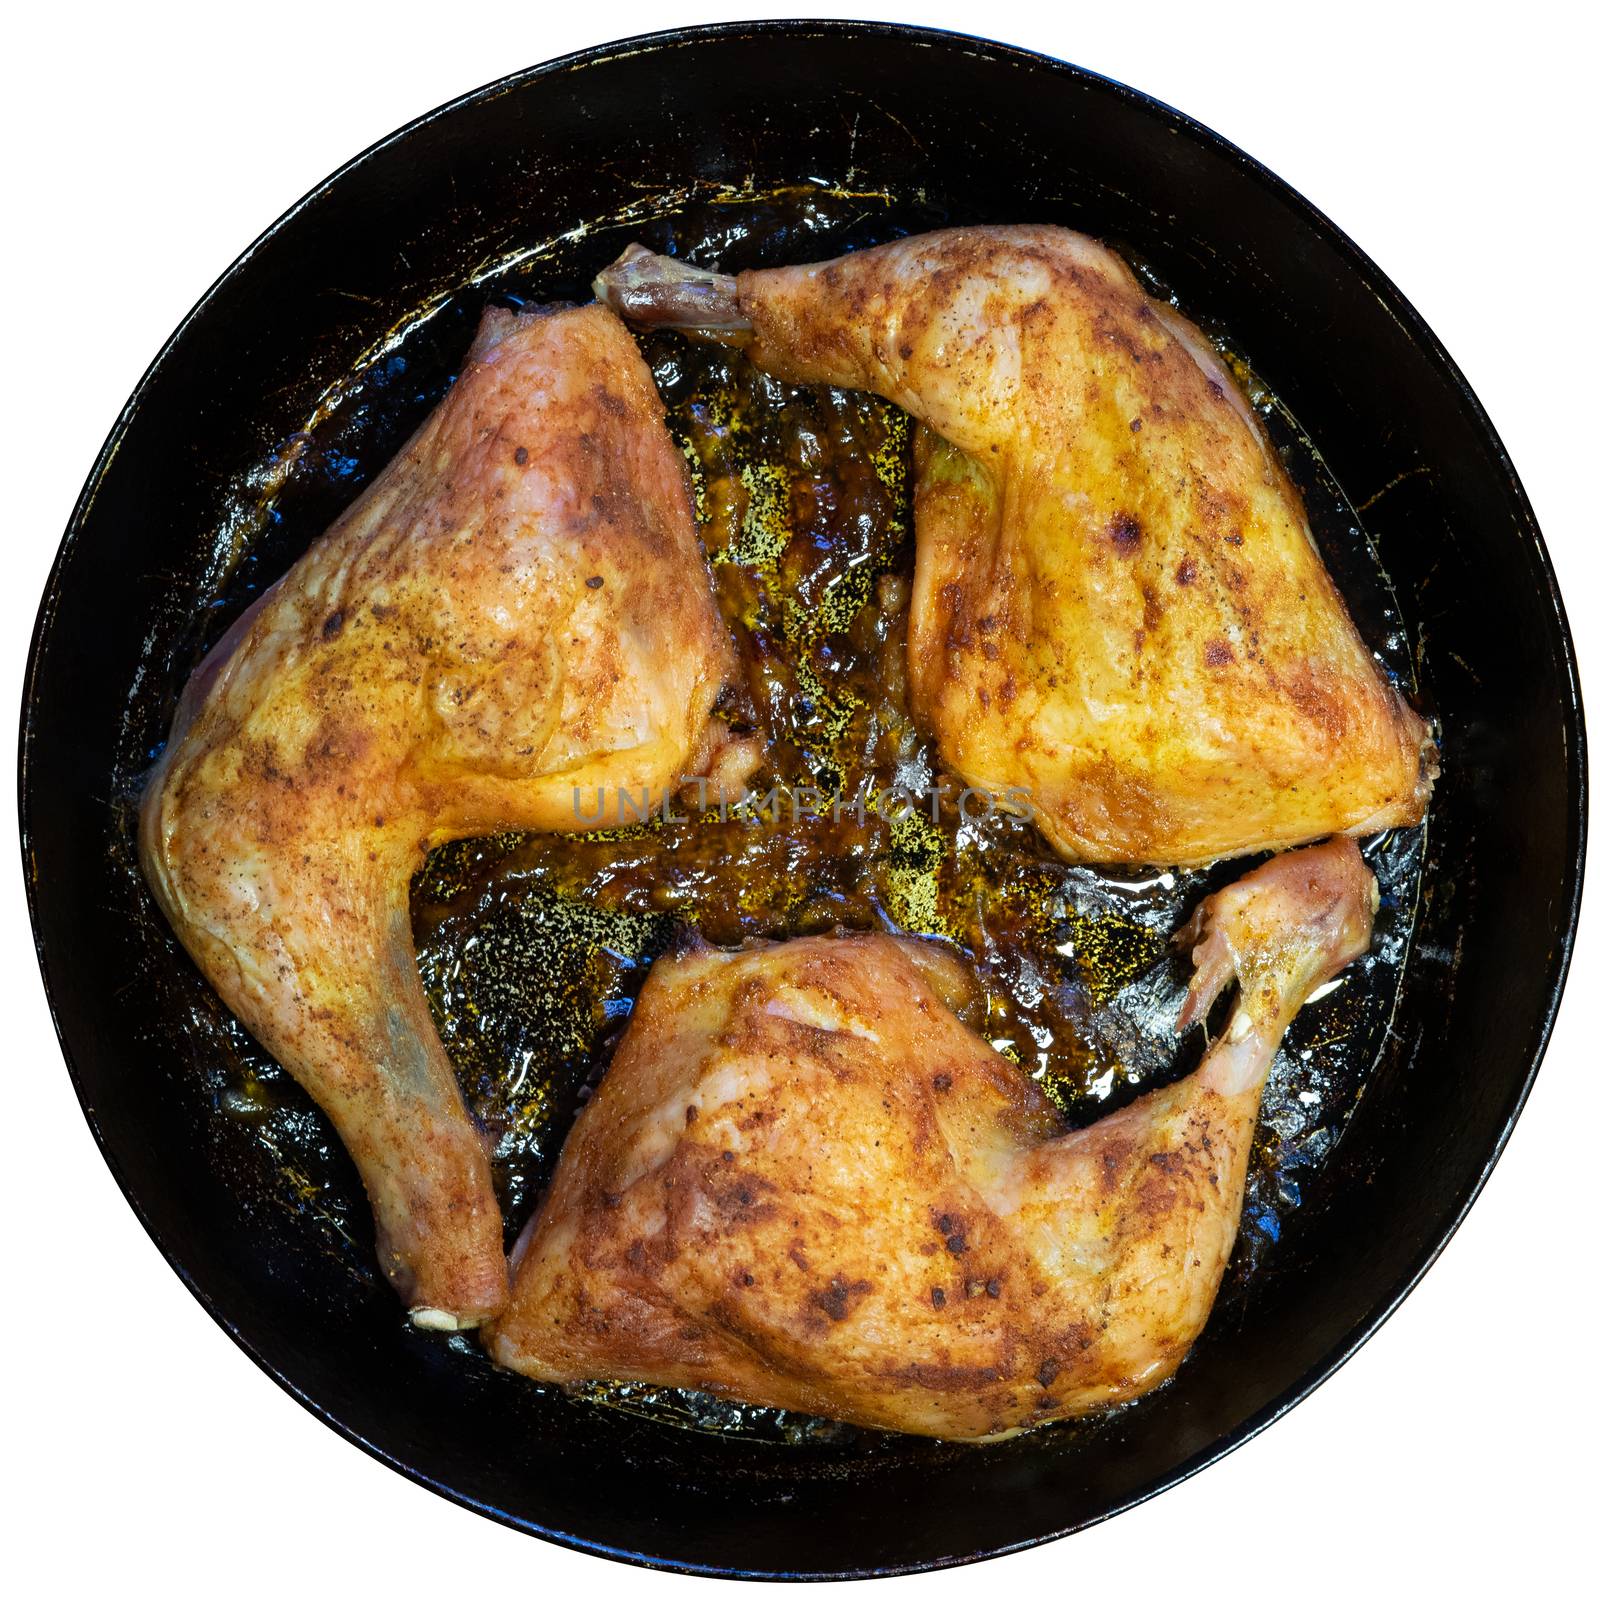 delicious baked chicken breasts in a frying pan